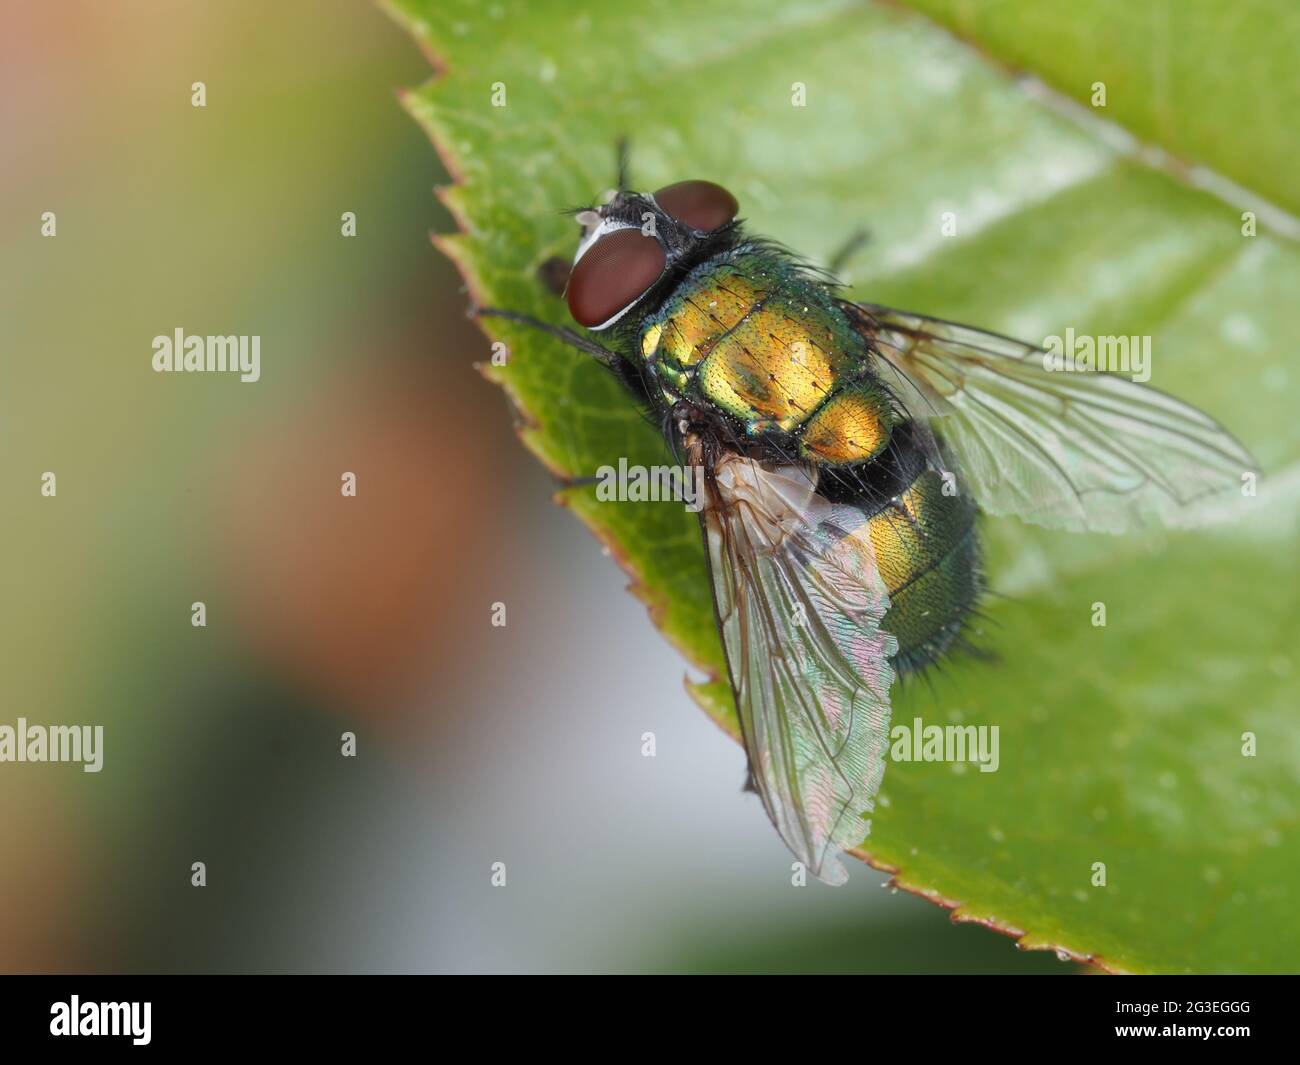 Green blow fly (Lucilia sp., most likely common green bottle fly - Lucilia sericata) Stock Photo